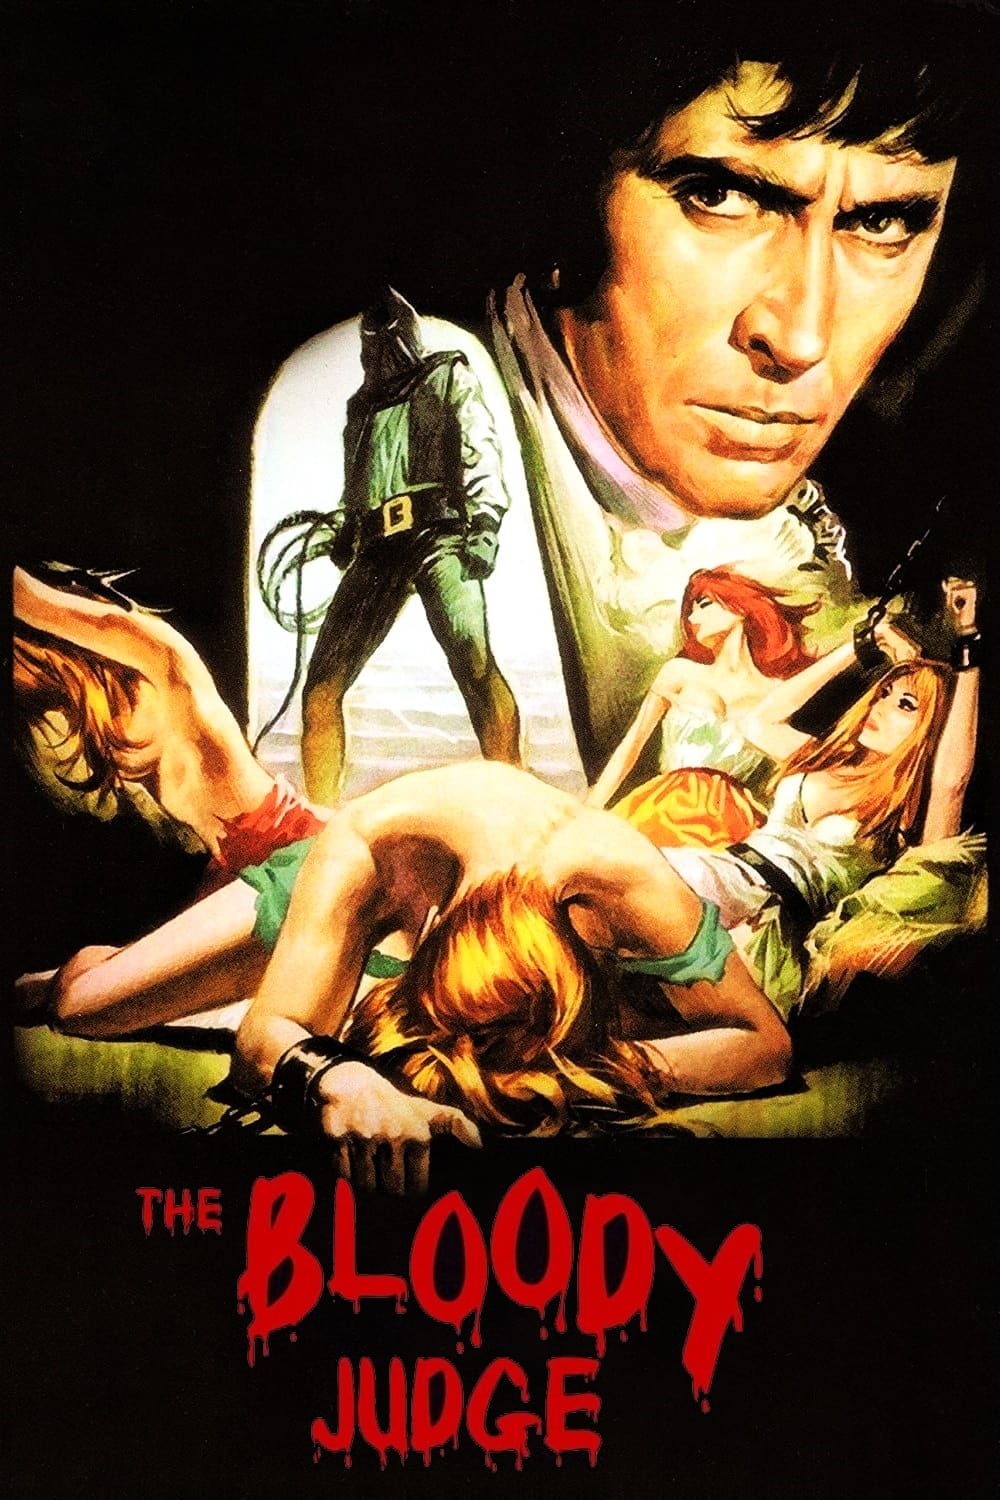 The Bloody Judge (1970)